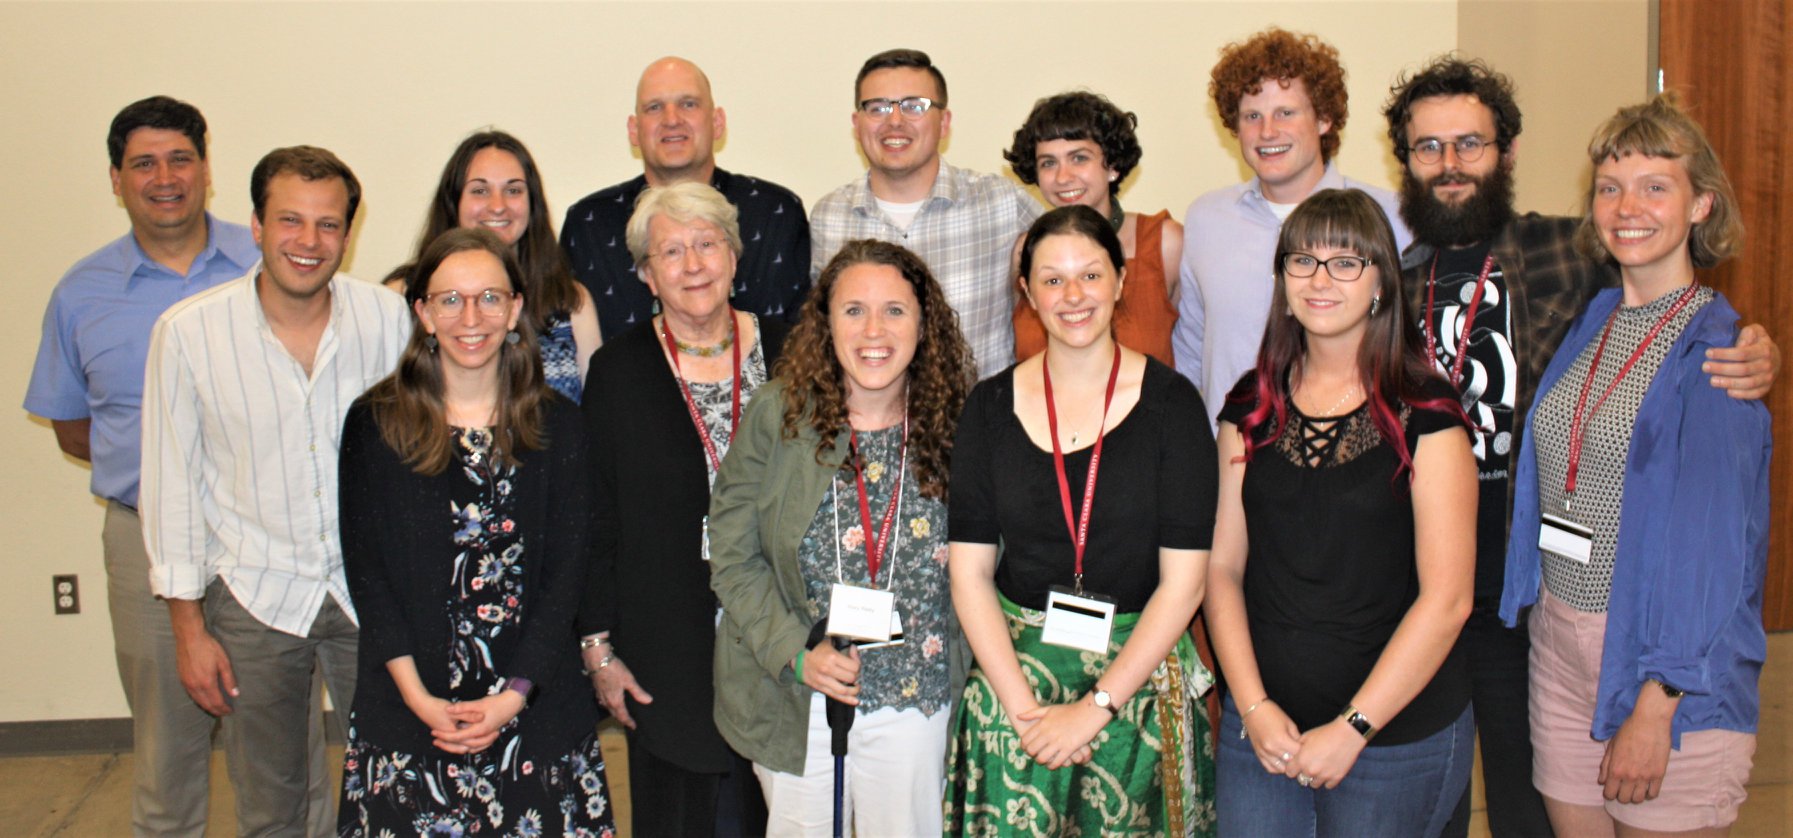 Daggy Scholars at 2019 ITMS Conference